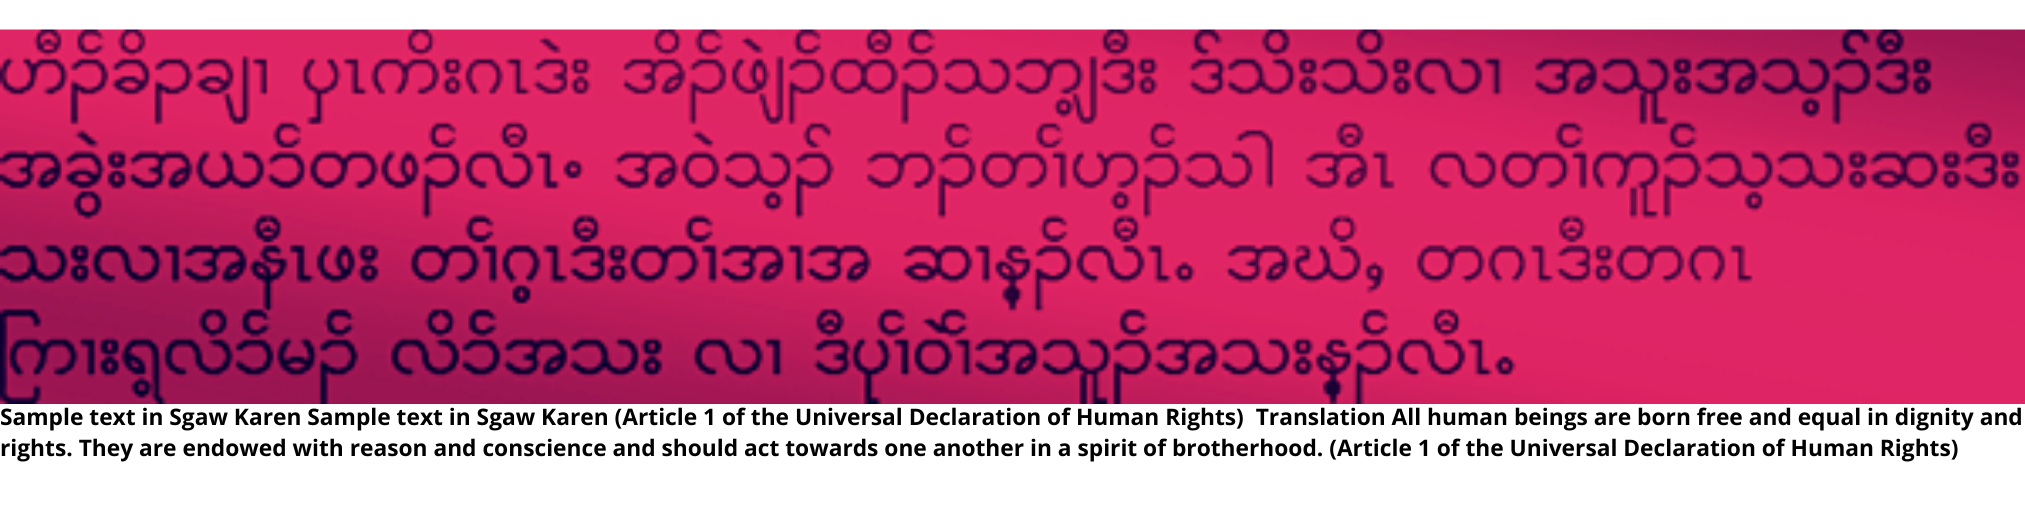 Sample text in Sgaw Karen Sample text in Sgaw Karen (Article 1 of the Universal Declaration of Human Rights)